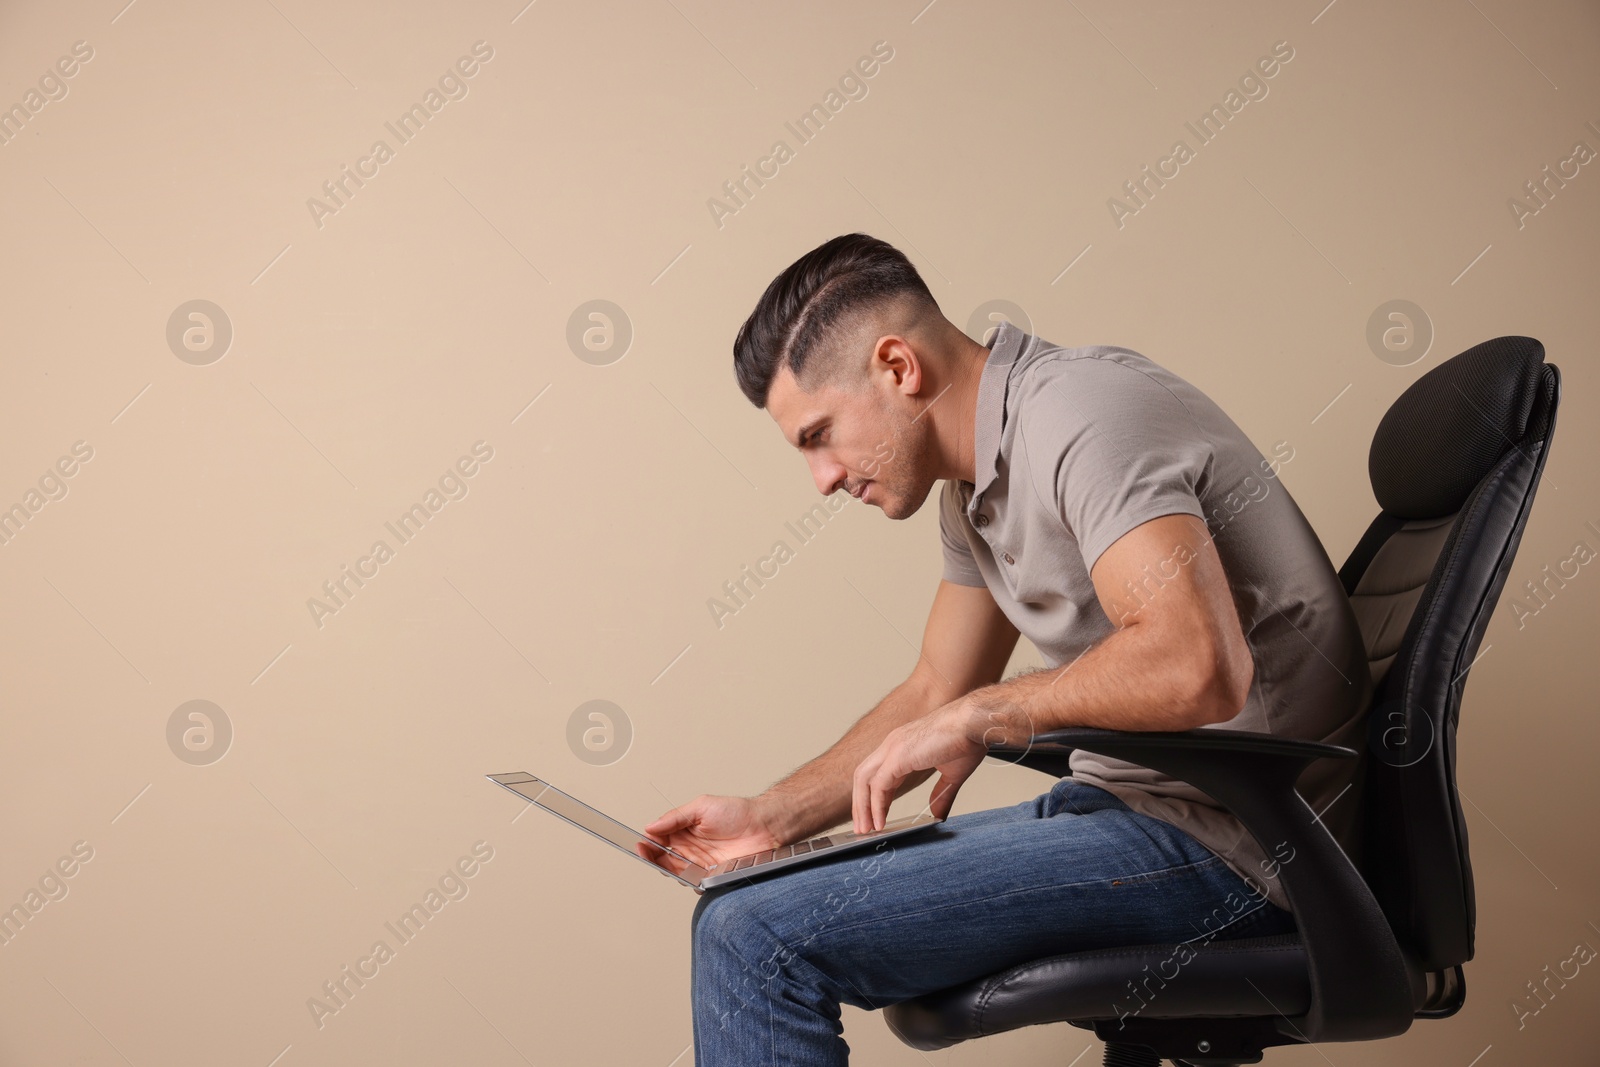 Photo of Man with poor posture using laptop while sitting on chair against beige background, space for text